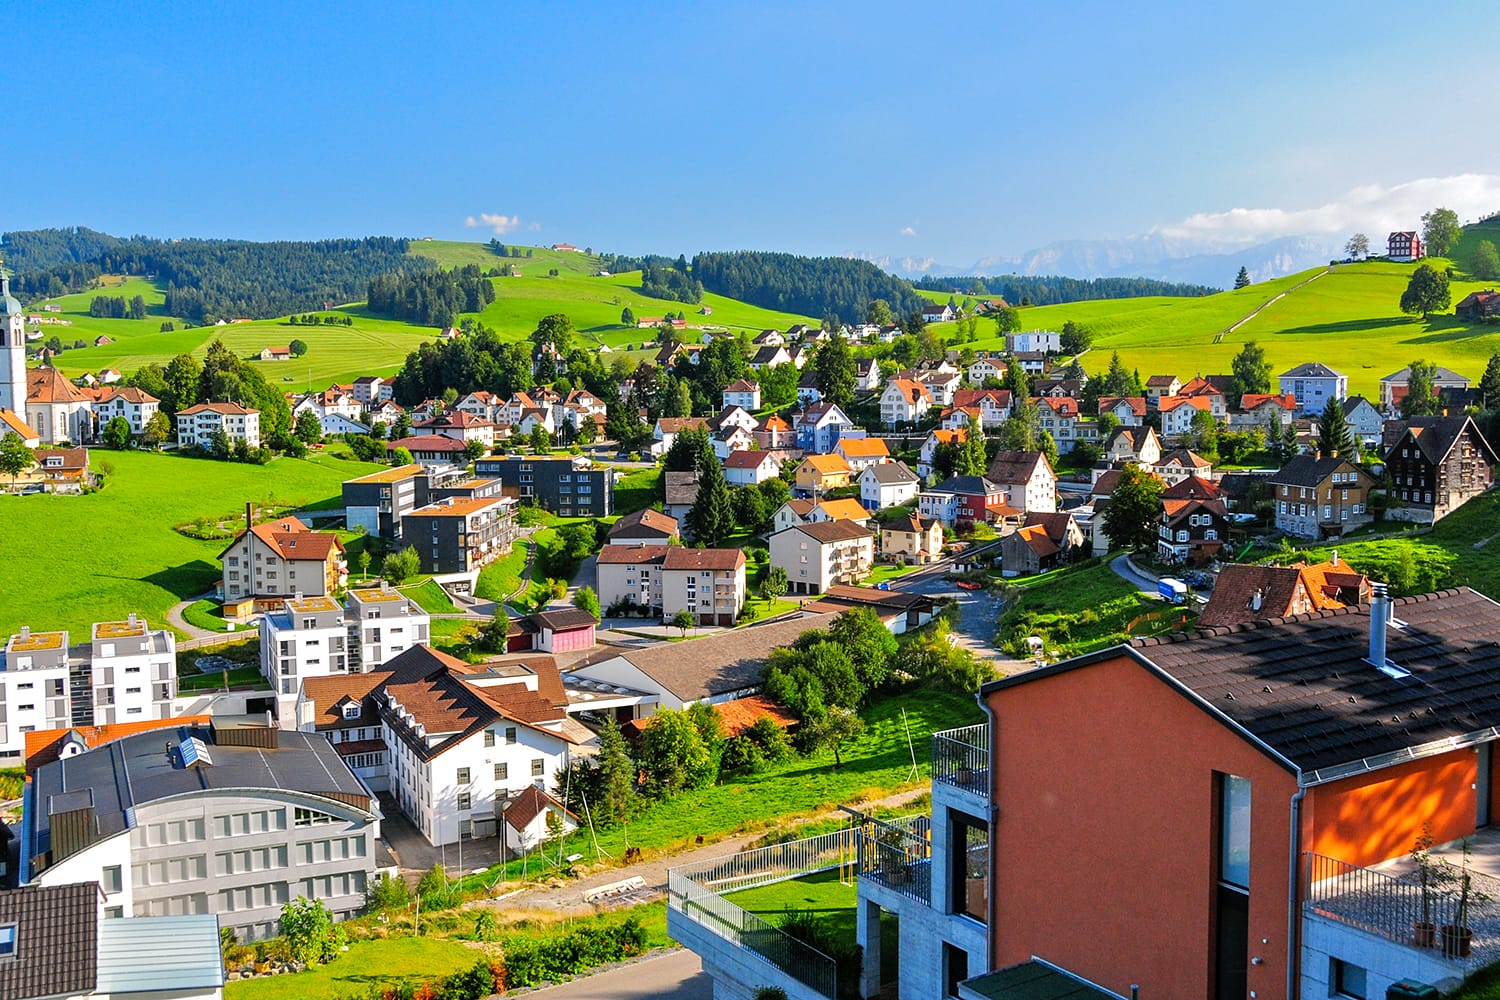 A beautiful village nested in the hills of Appenzellerland, Canton Appenzell, Switzerland